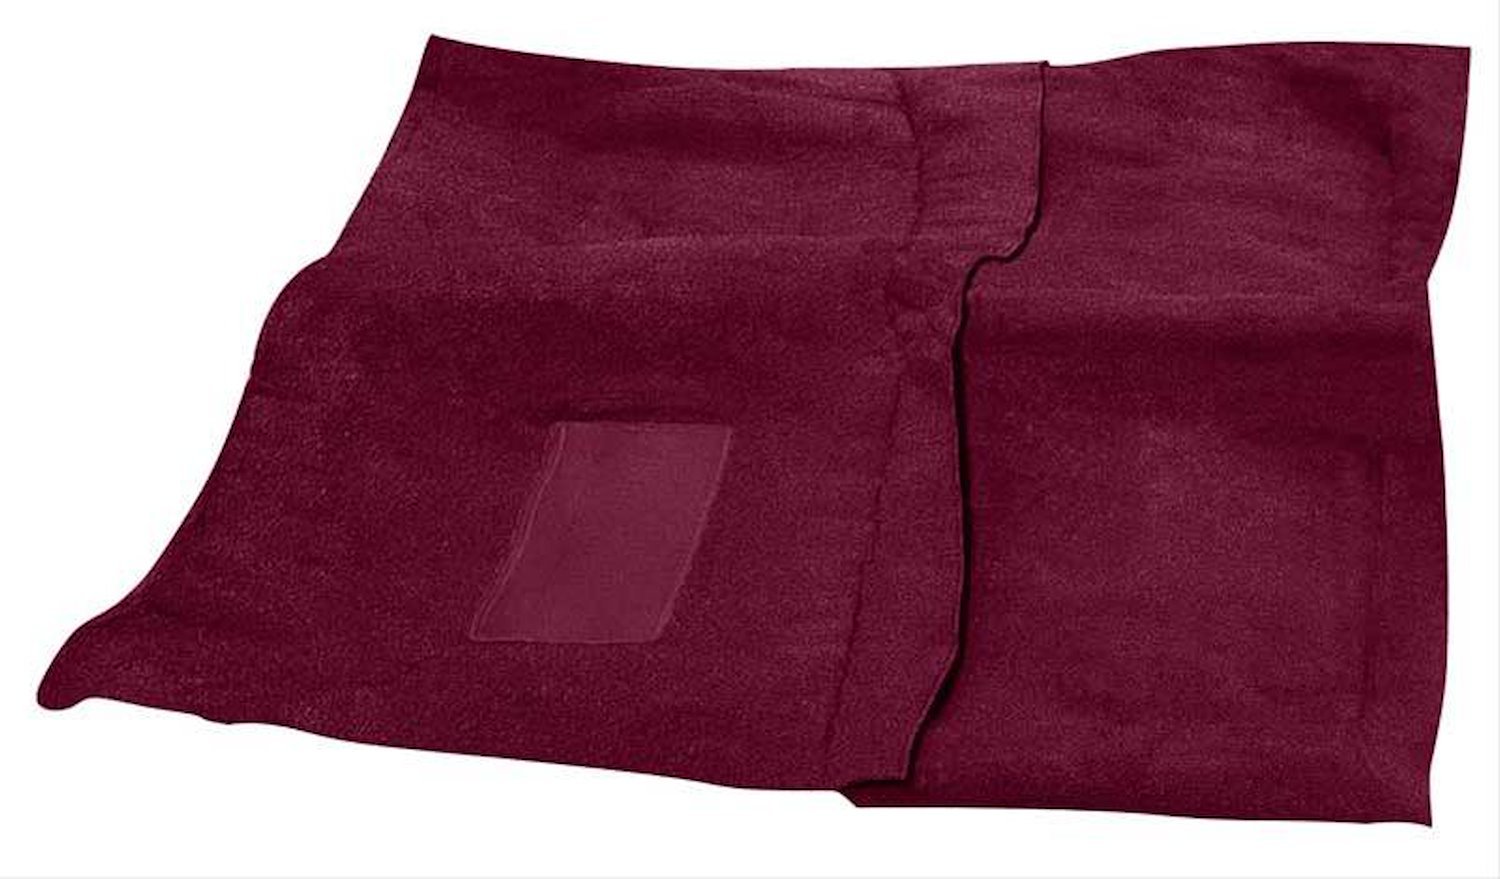 MA531513 Loop Carpet With Tails 1967-69 Dodge Dart Convertible With Auto Trans Maroon